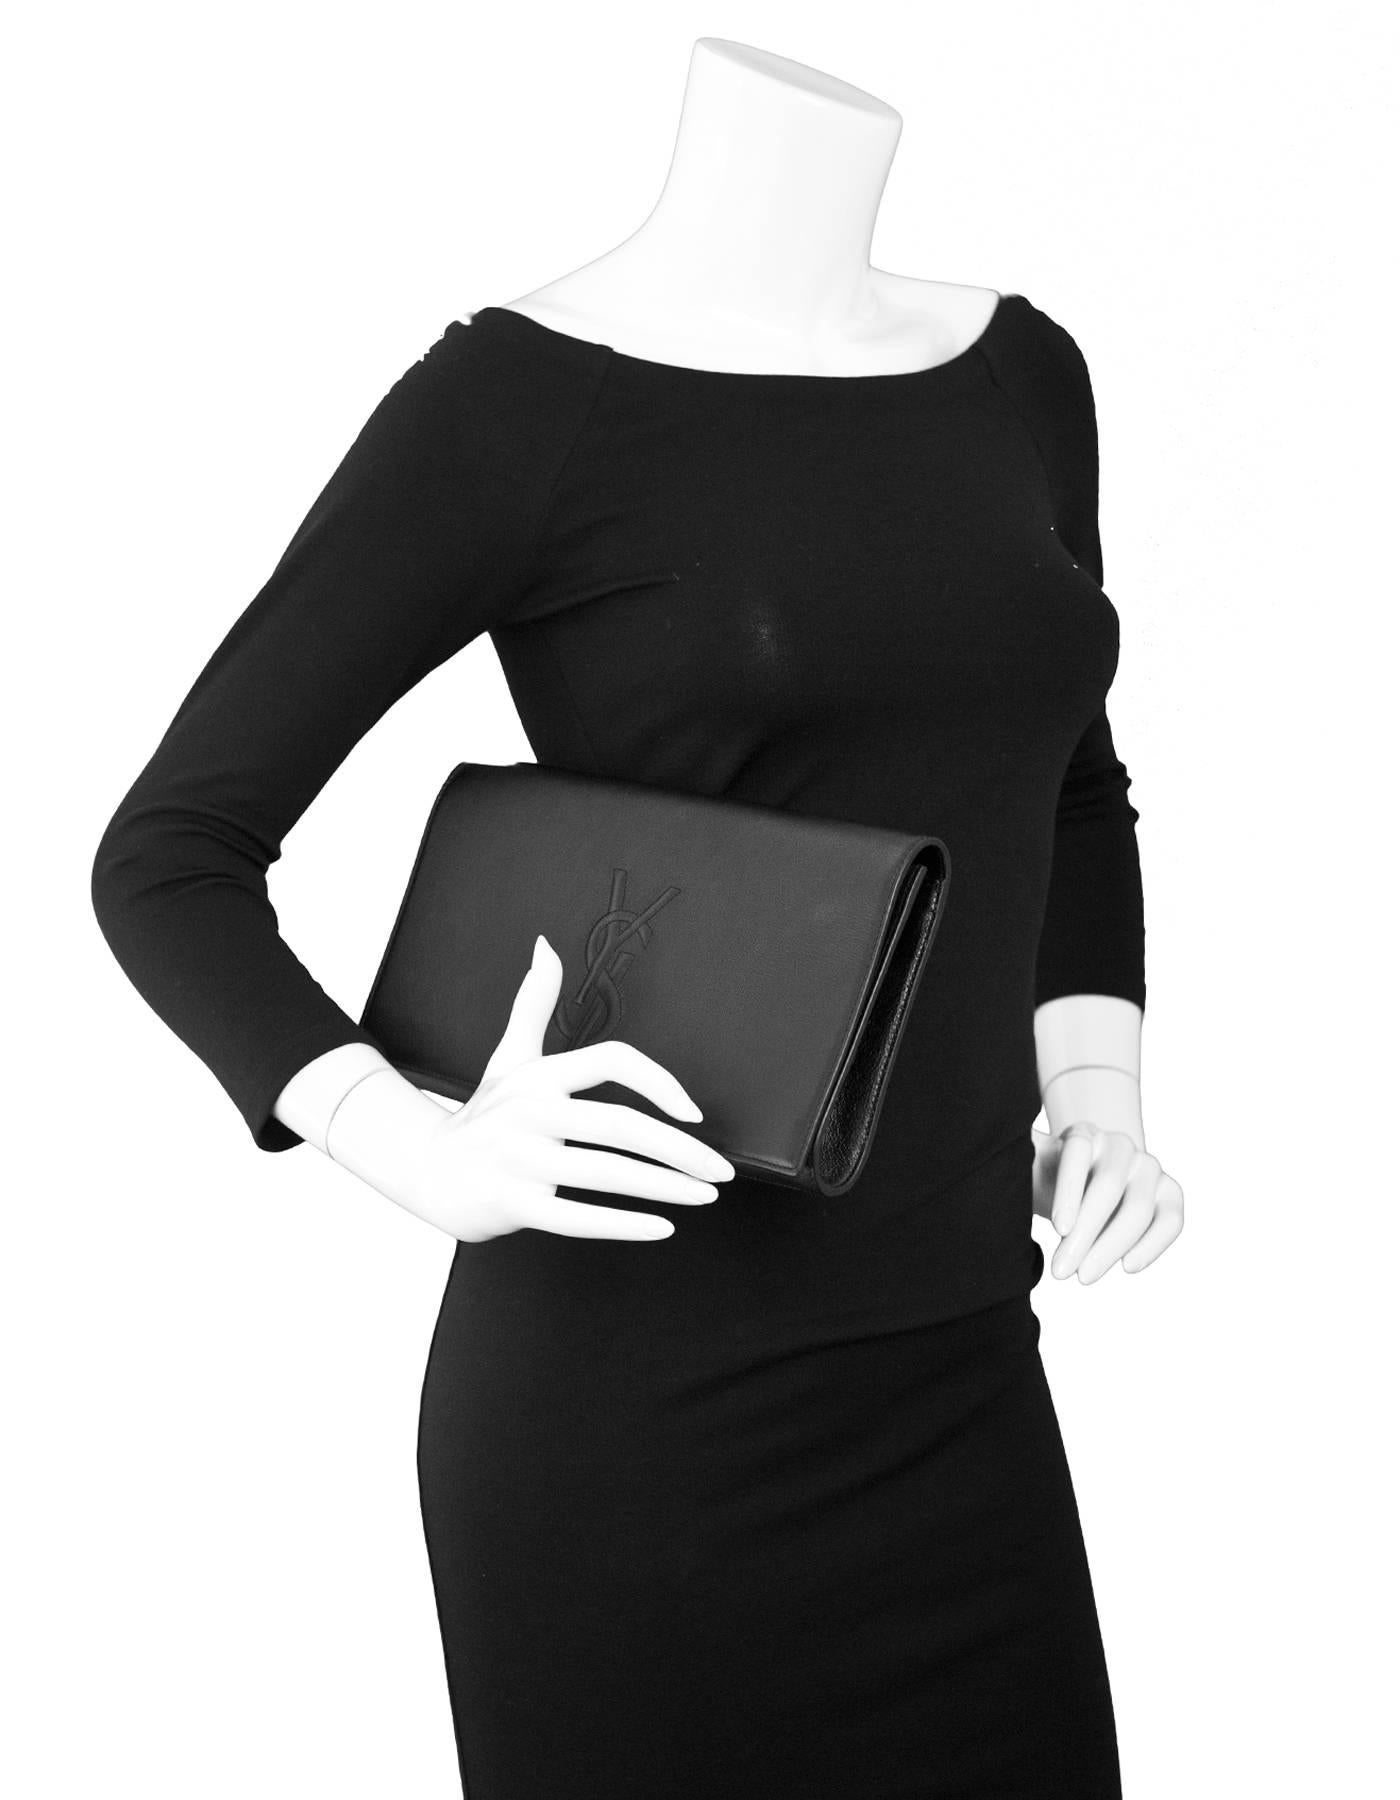 Yves Saint Laurent Black Leather Large Belle De Jour Clutch

Made In: Italy
Color: Black
Materials: Calfskin leather 
Lining: Black textile
Closure/Opening: Flap top with snap closure
Exterior Pockets: None
Interior Pockets: One small patch